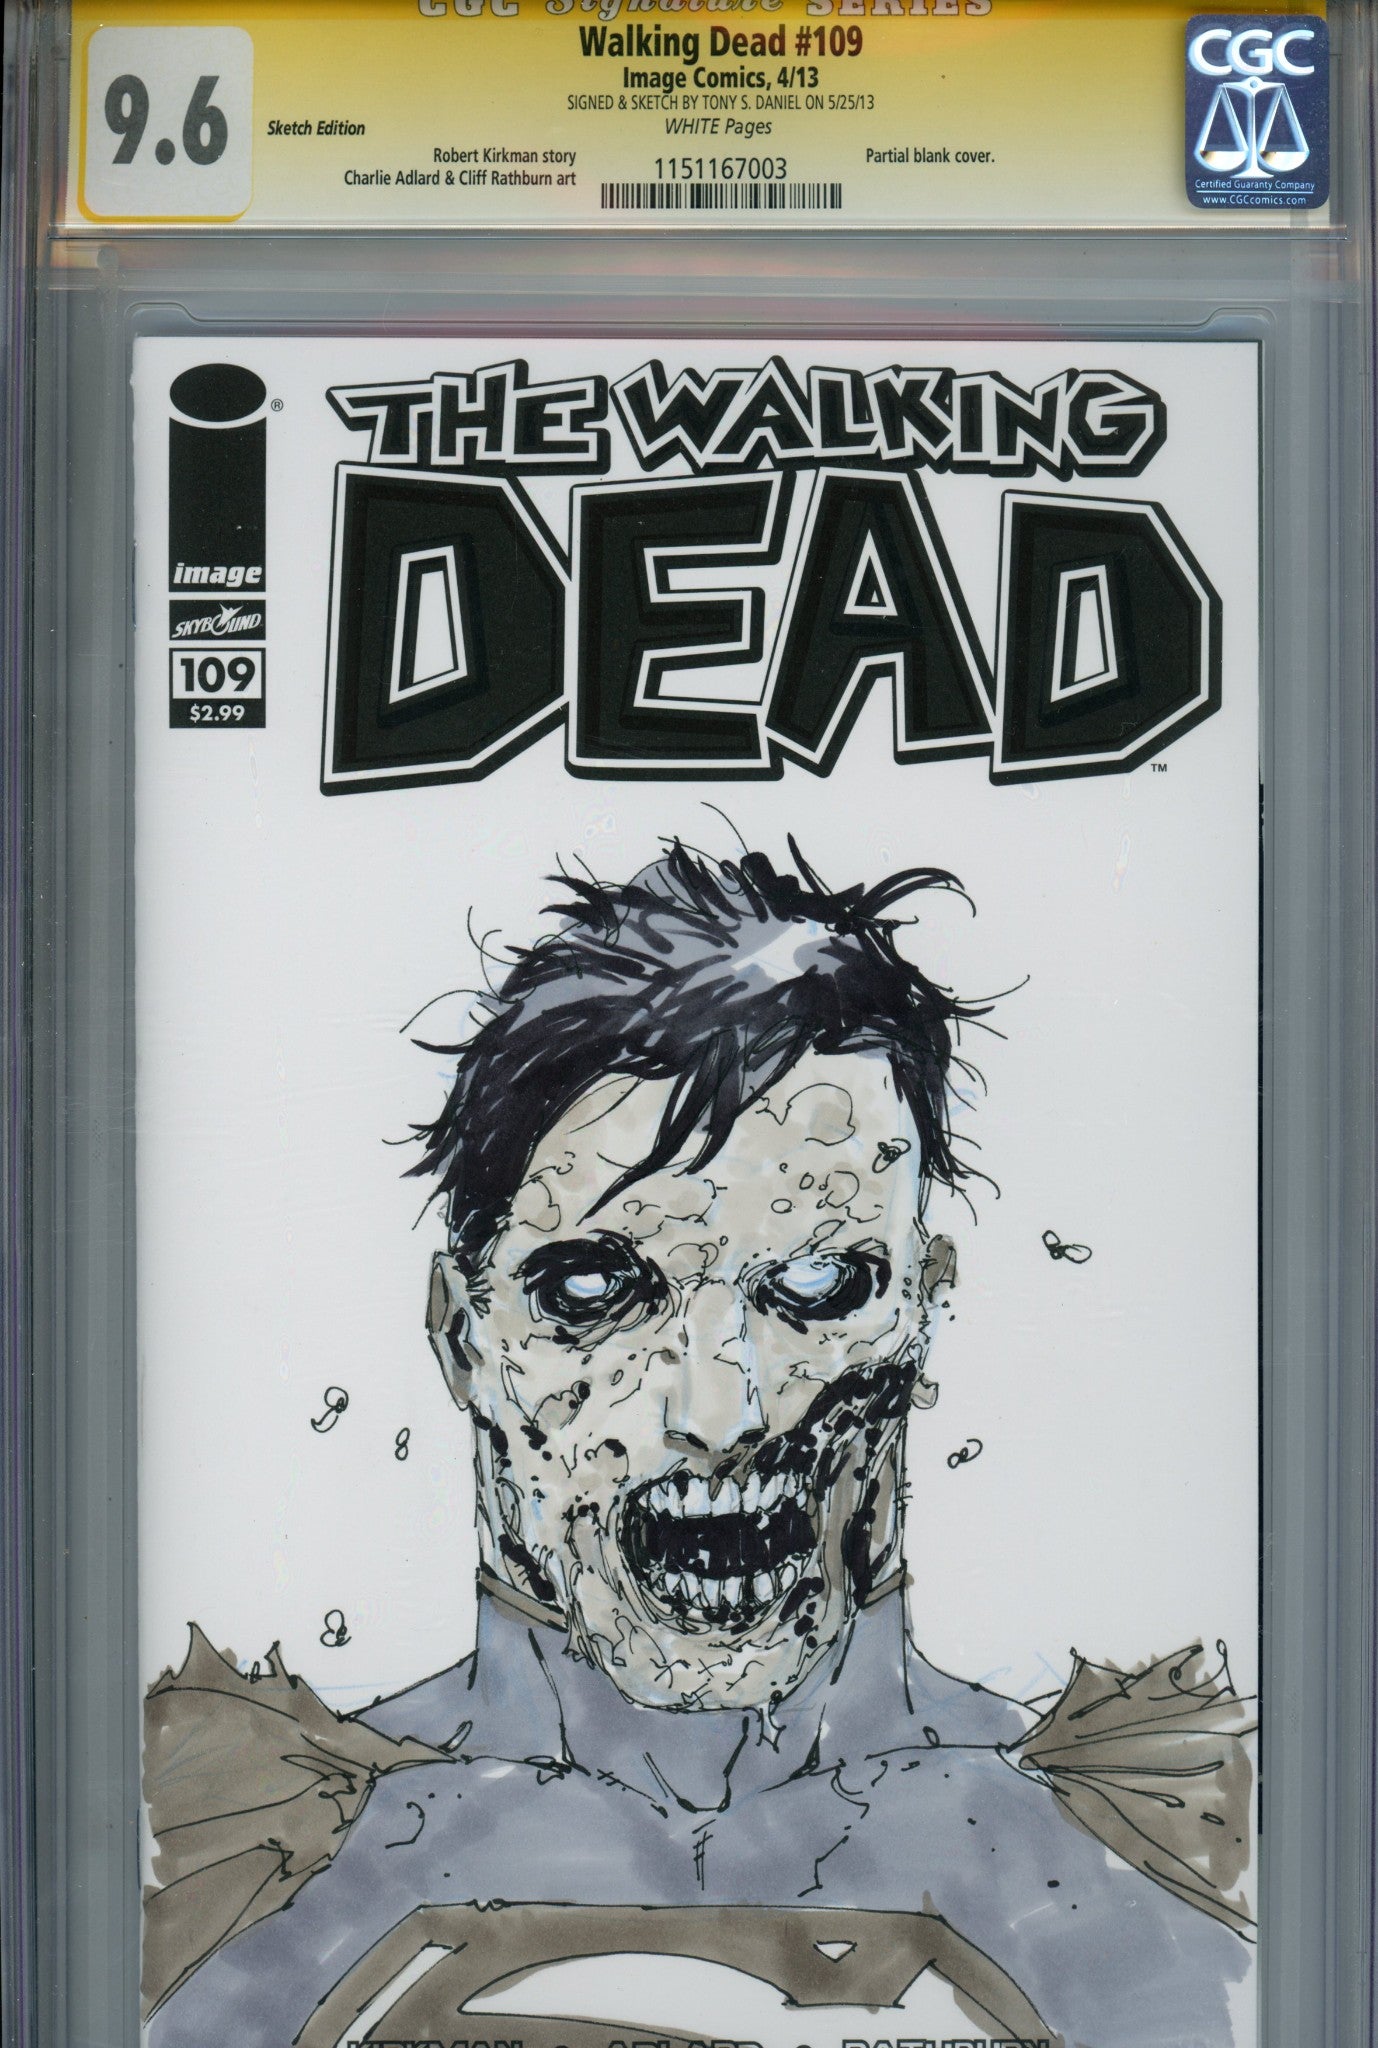 The Walking Dead 109 CGC 9.6 (NM+) (2013) Blank Variant Signed / Remarked x1 Cover Tony Daniel 